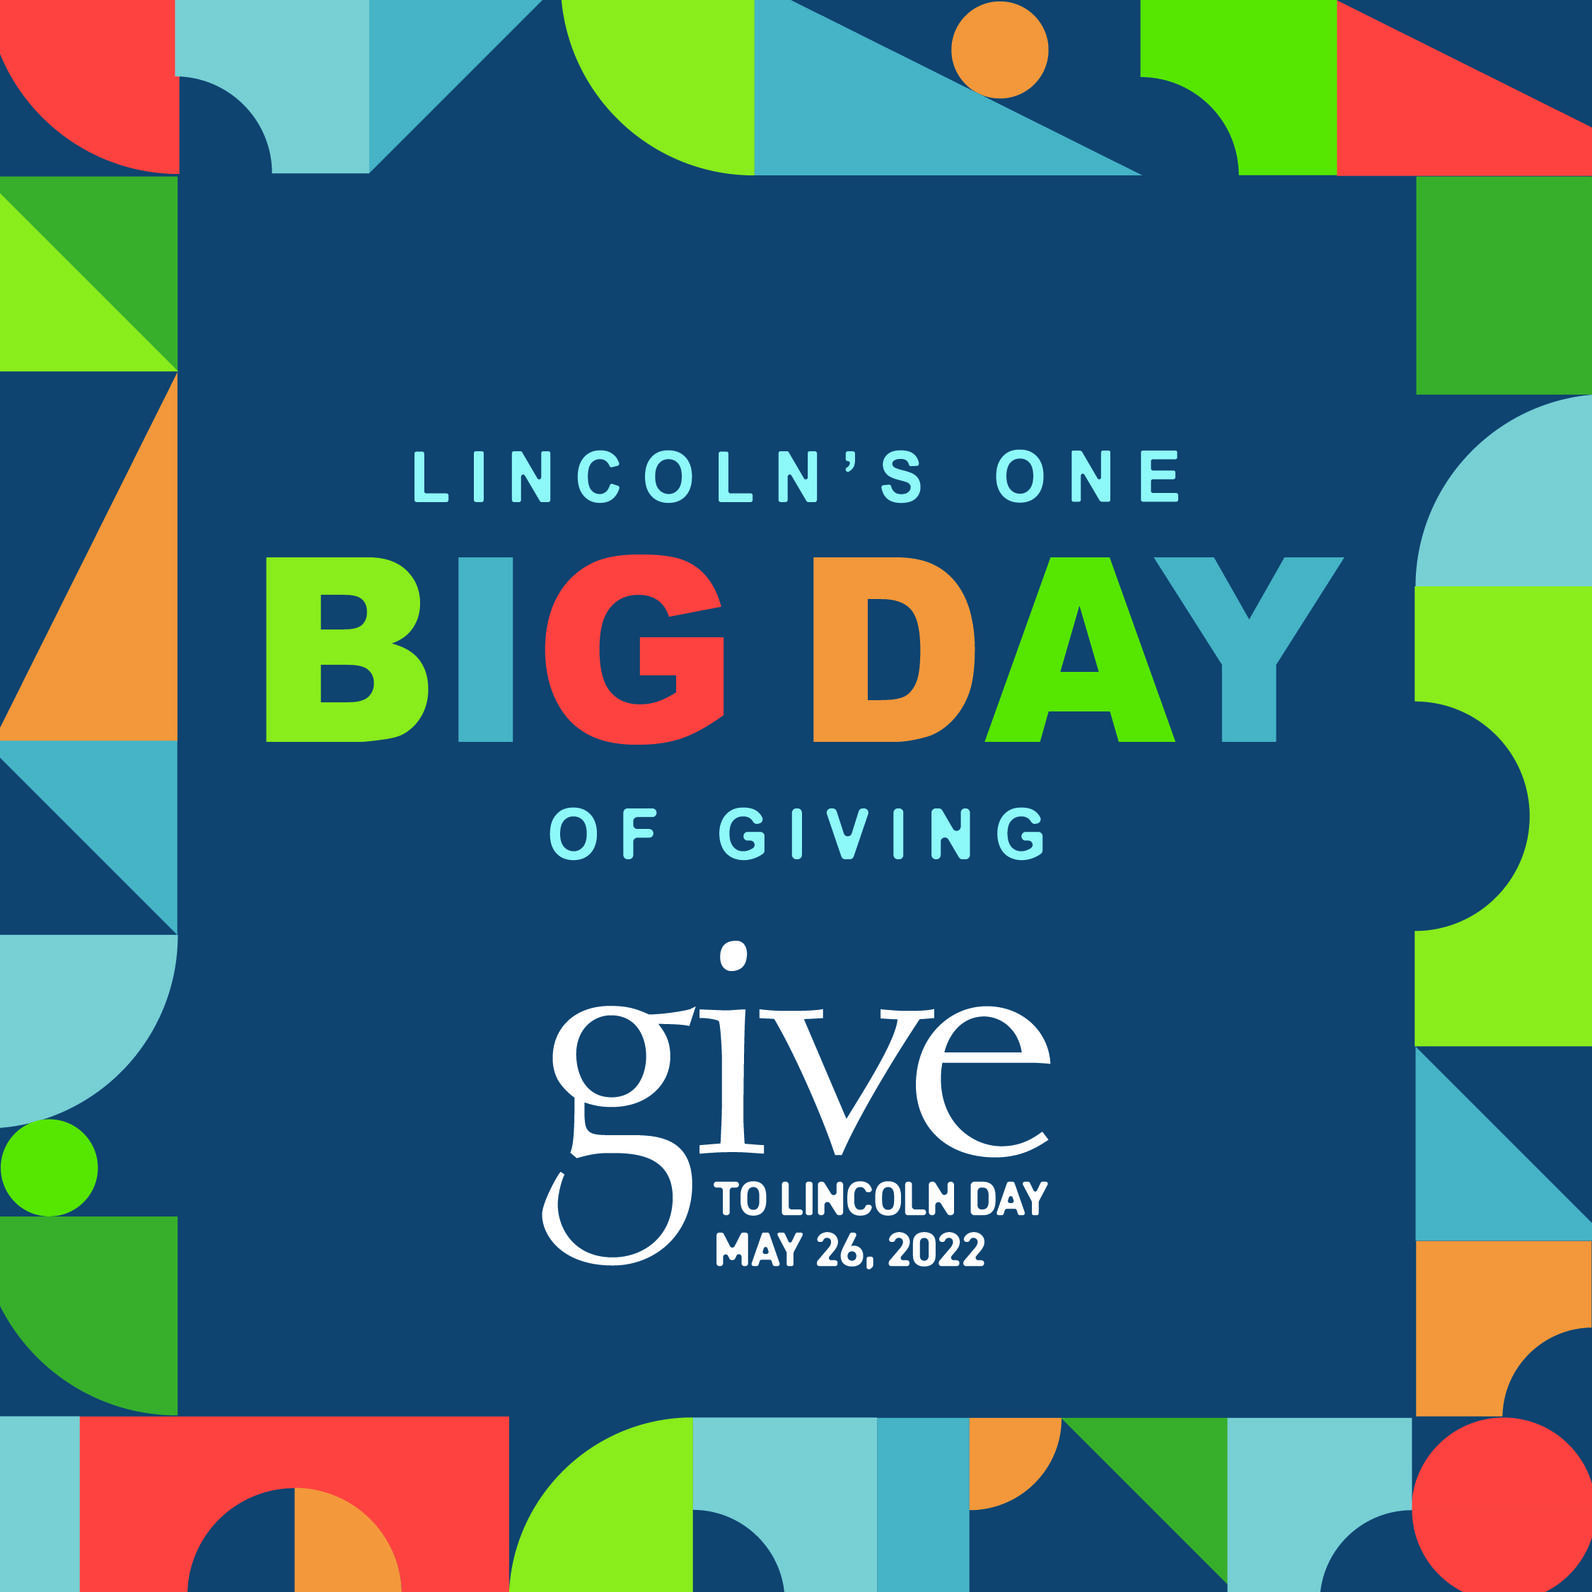 Give to Lincoln Day